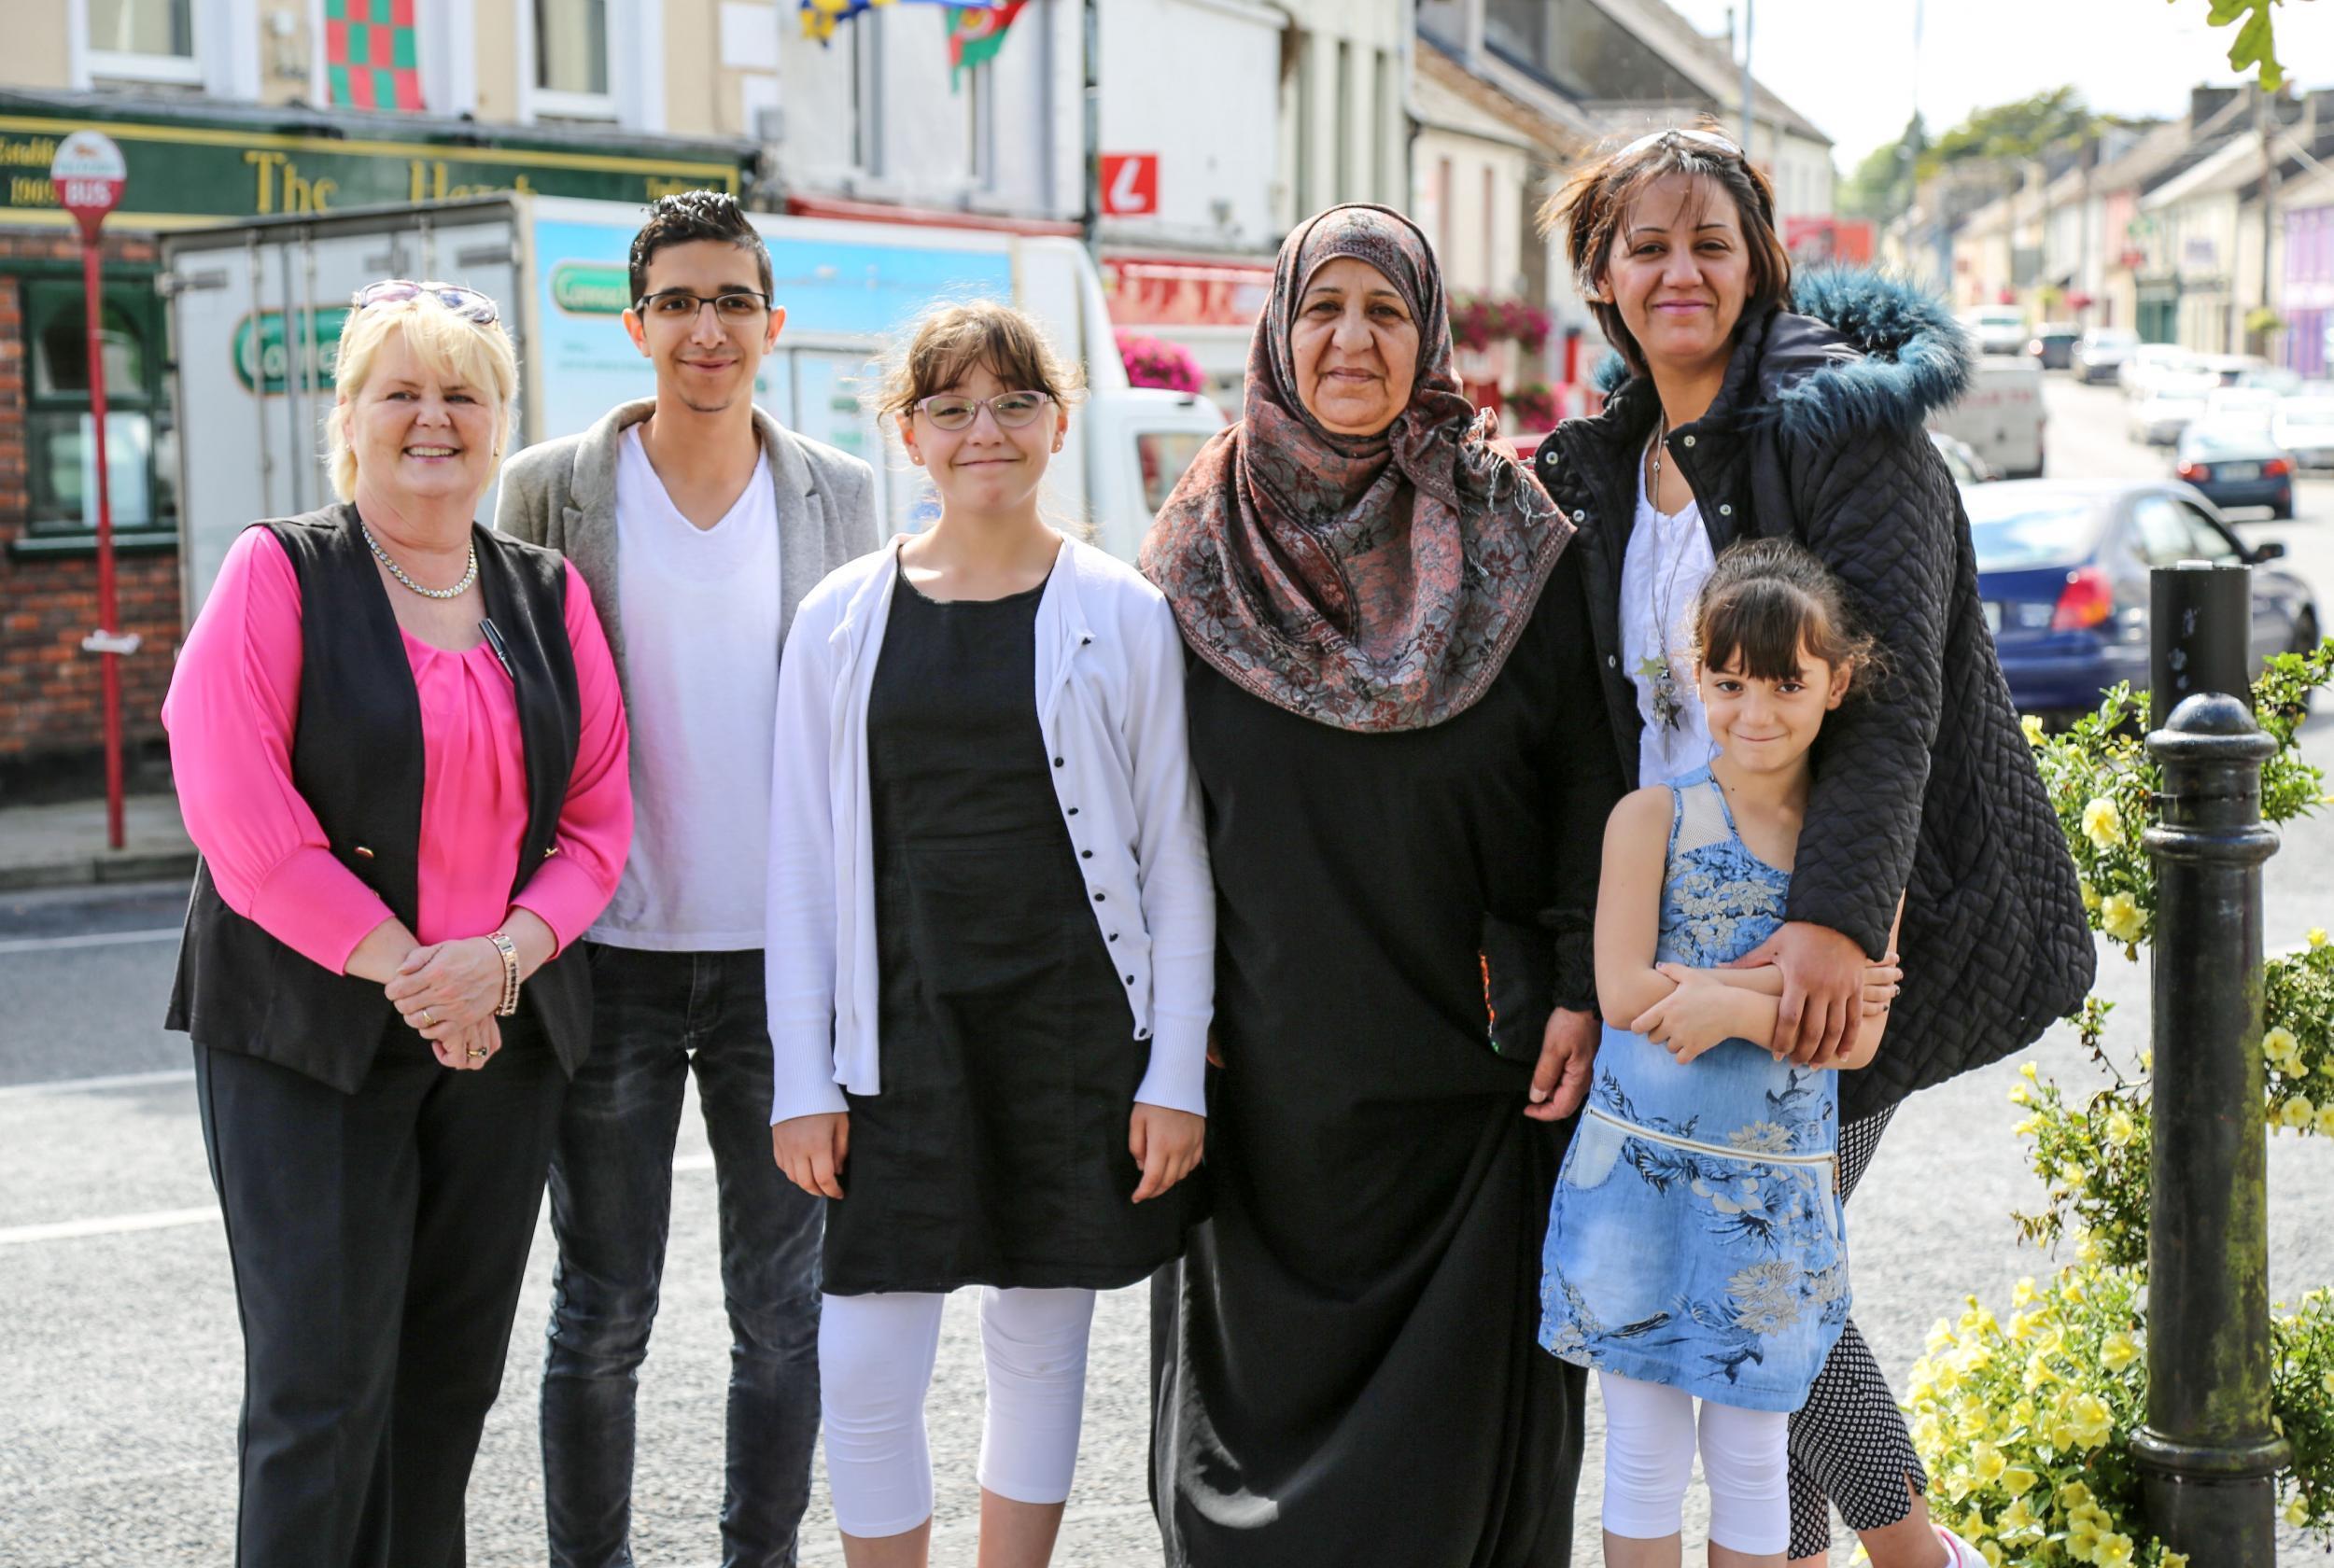 From left: Jackie, Ghassan, Ahlam, Seeham, Jenan, and Judy in Ballaghaderreen, Ireland